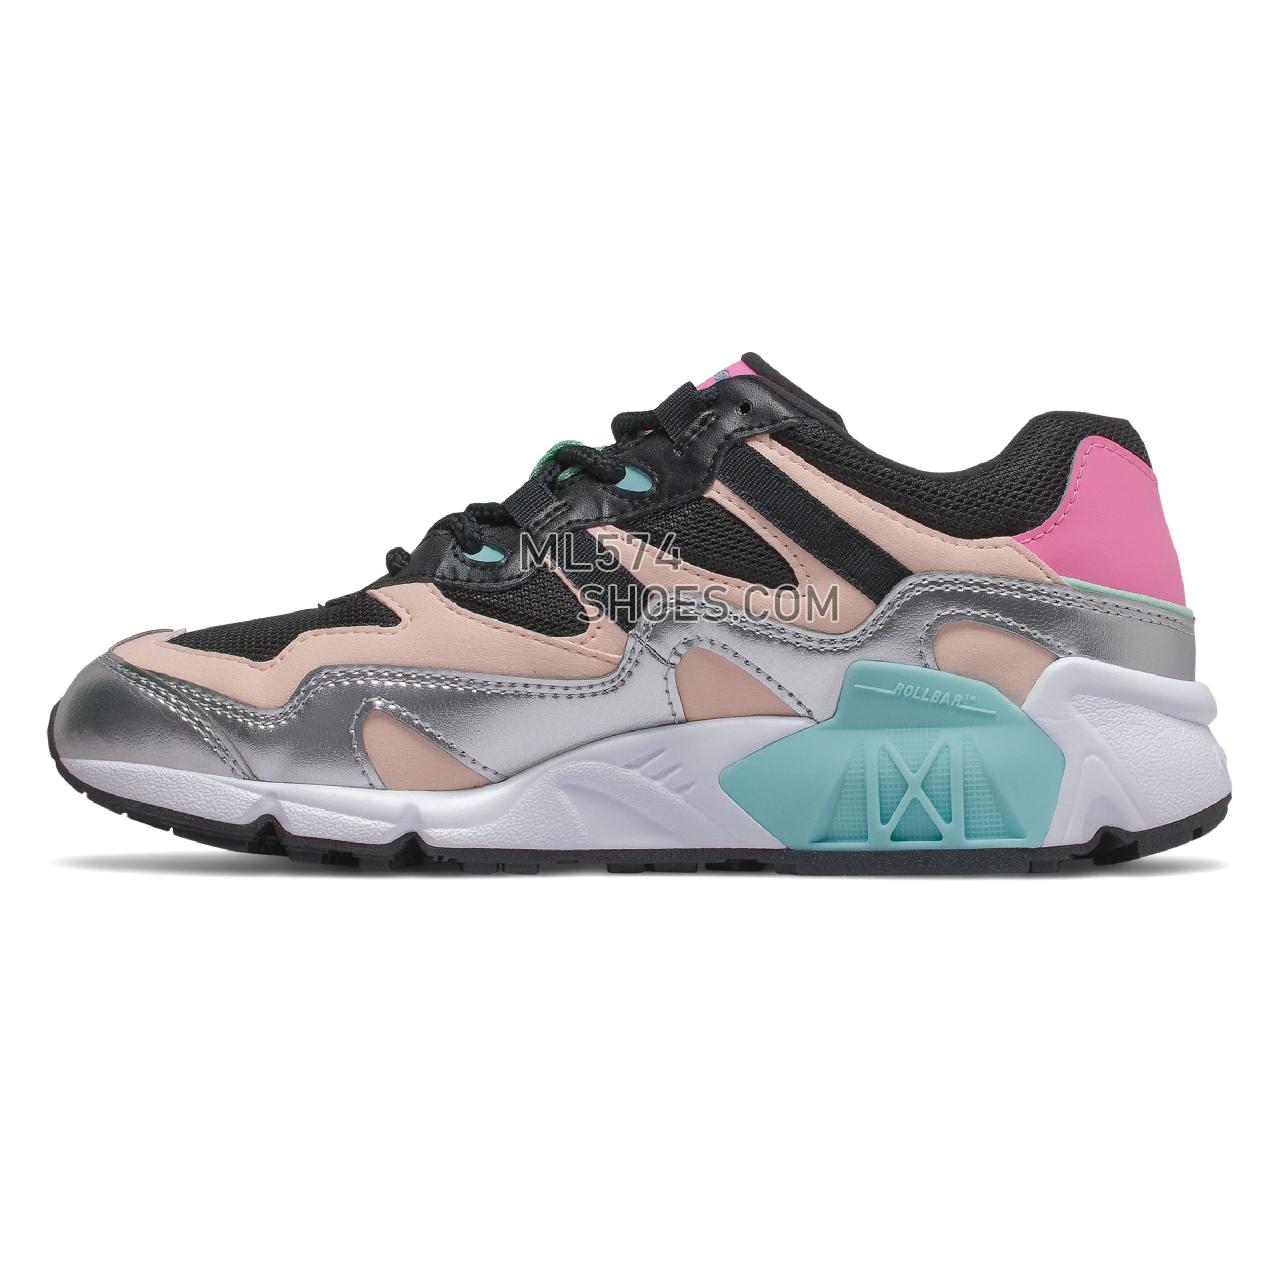 New Balance 850 - Women's Whats Trending - Silver with Candy Pink - WL850LBE